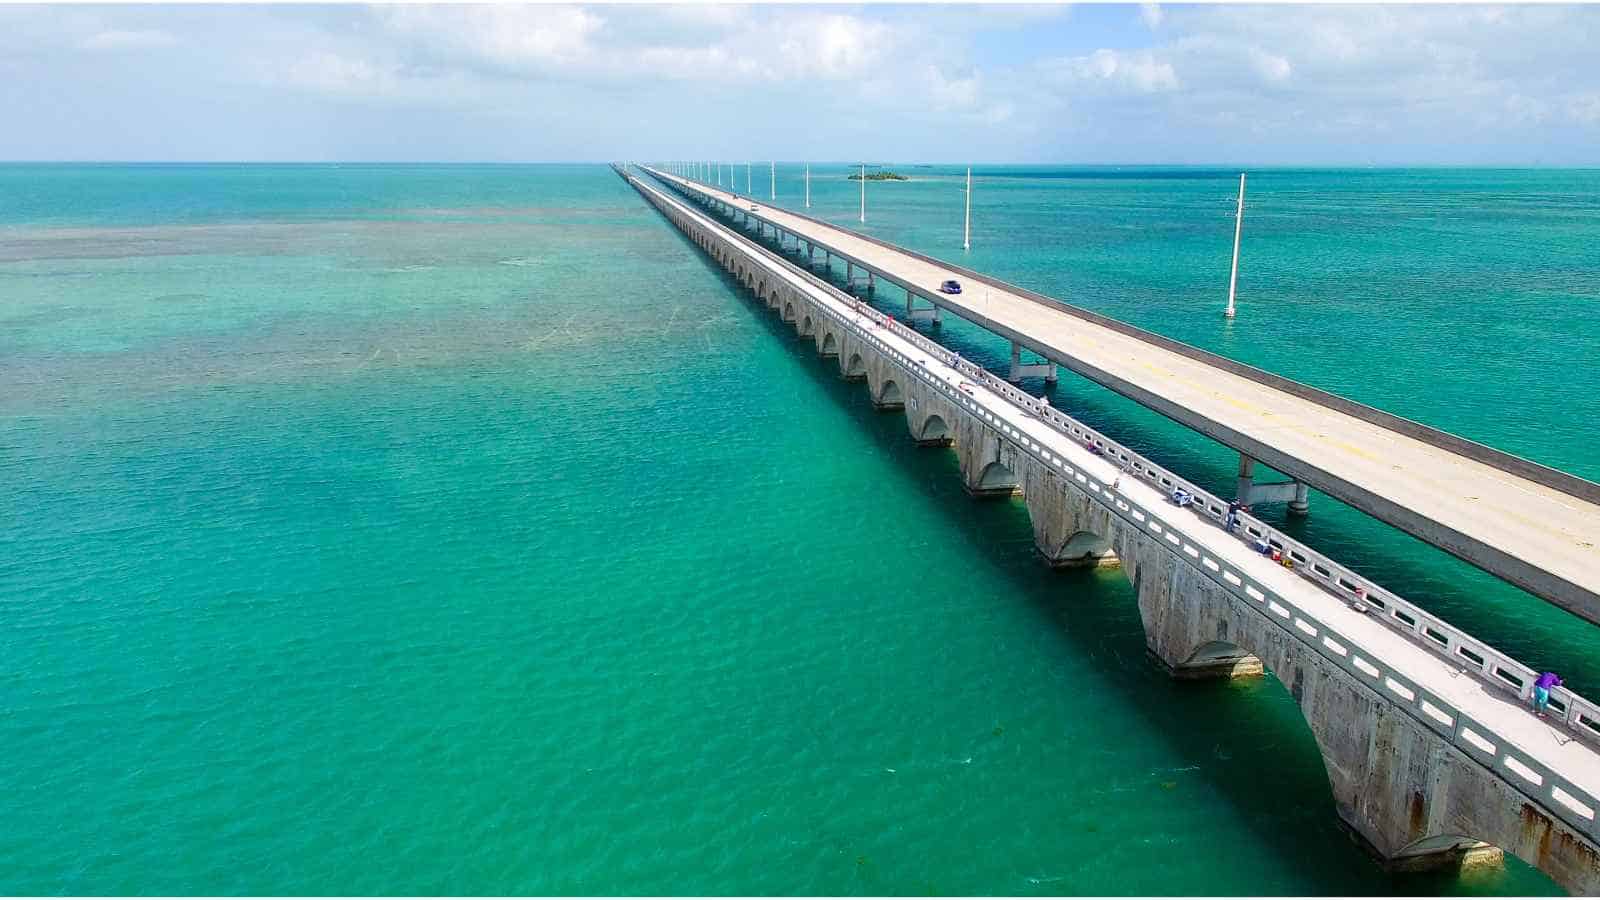 <p><span>The Florida Keys are a string of tropical islands located at the southern tip of Florida, connected by the iconic Overseas Highway. This destination offers a l<a href="https://frenzhub.com/caribbean-destinations/">aid-back island lifestyle</a>, world-renowned fishing and diving spots, and stunning sunsets. As part of the United States, no passport is needed for US citizens to visit the Florida Keys.</span></p>